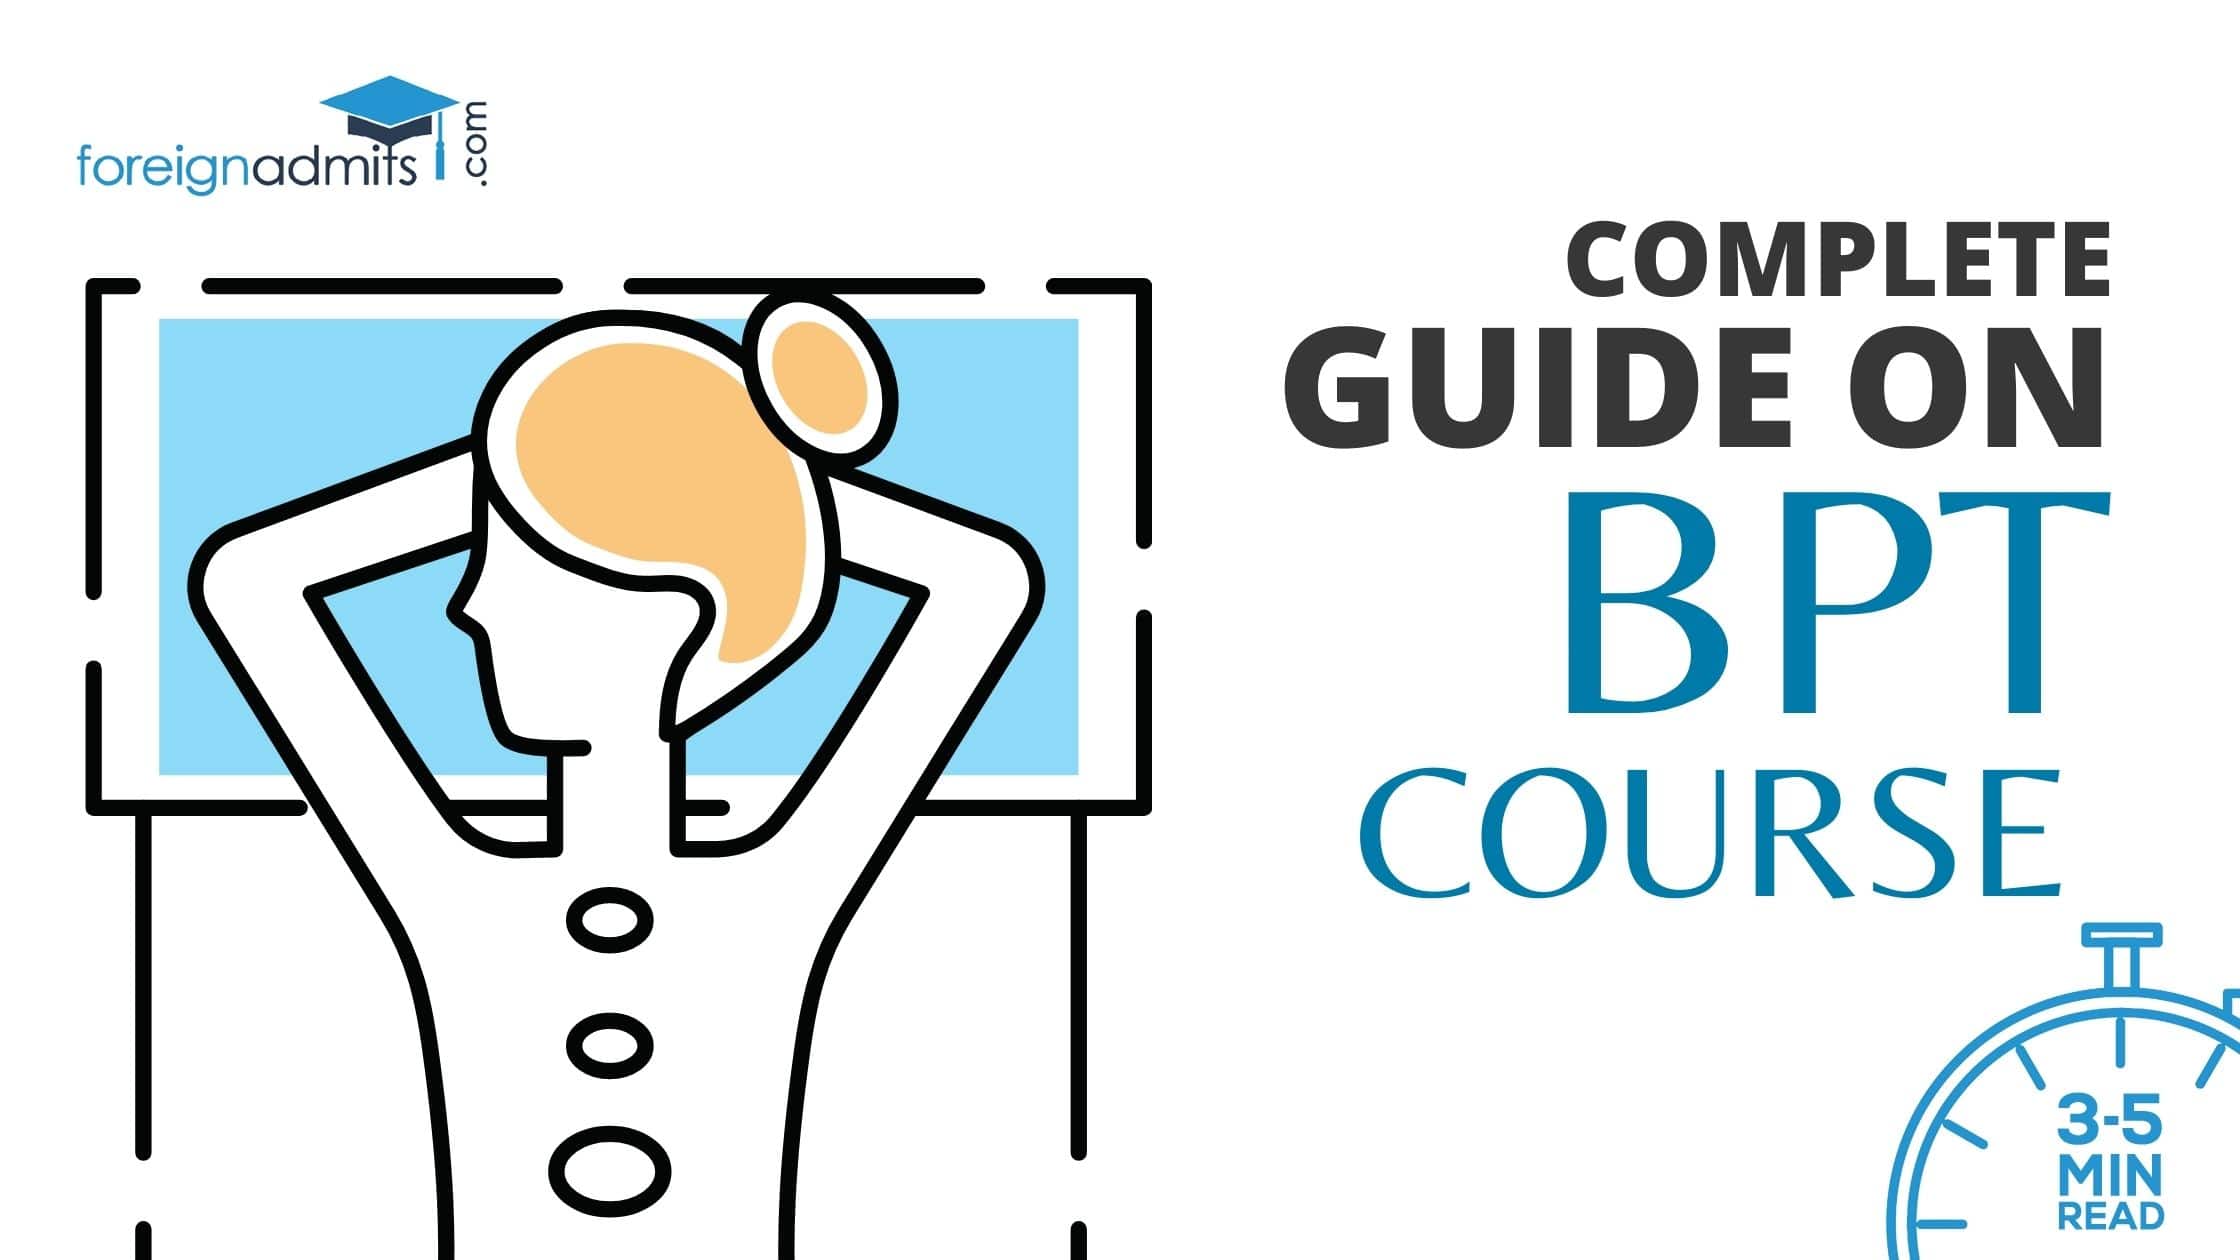 Complete Guide on BPT Course